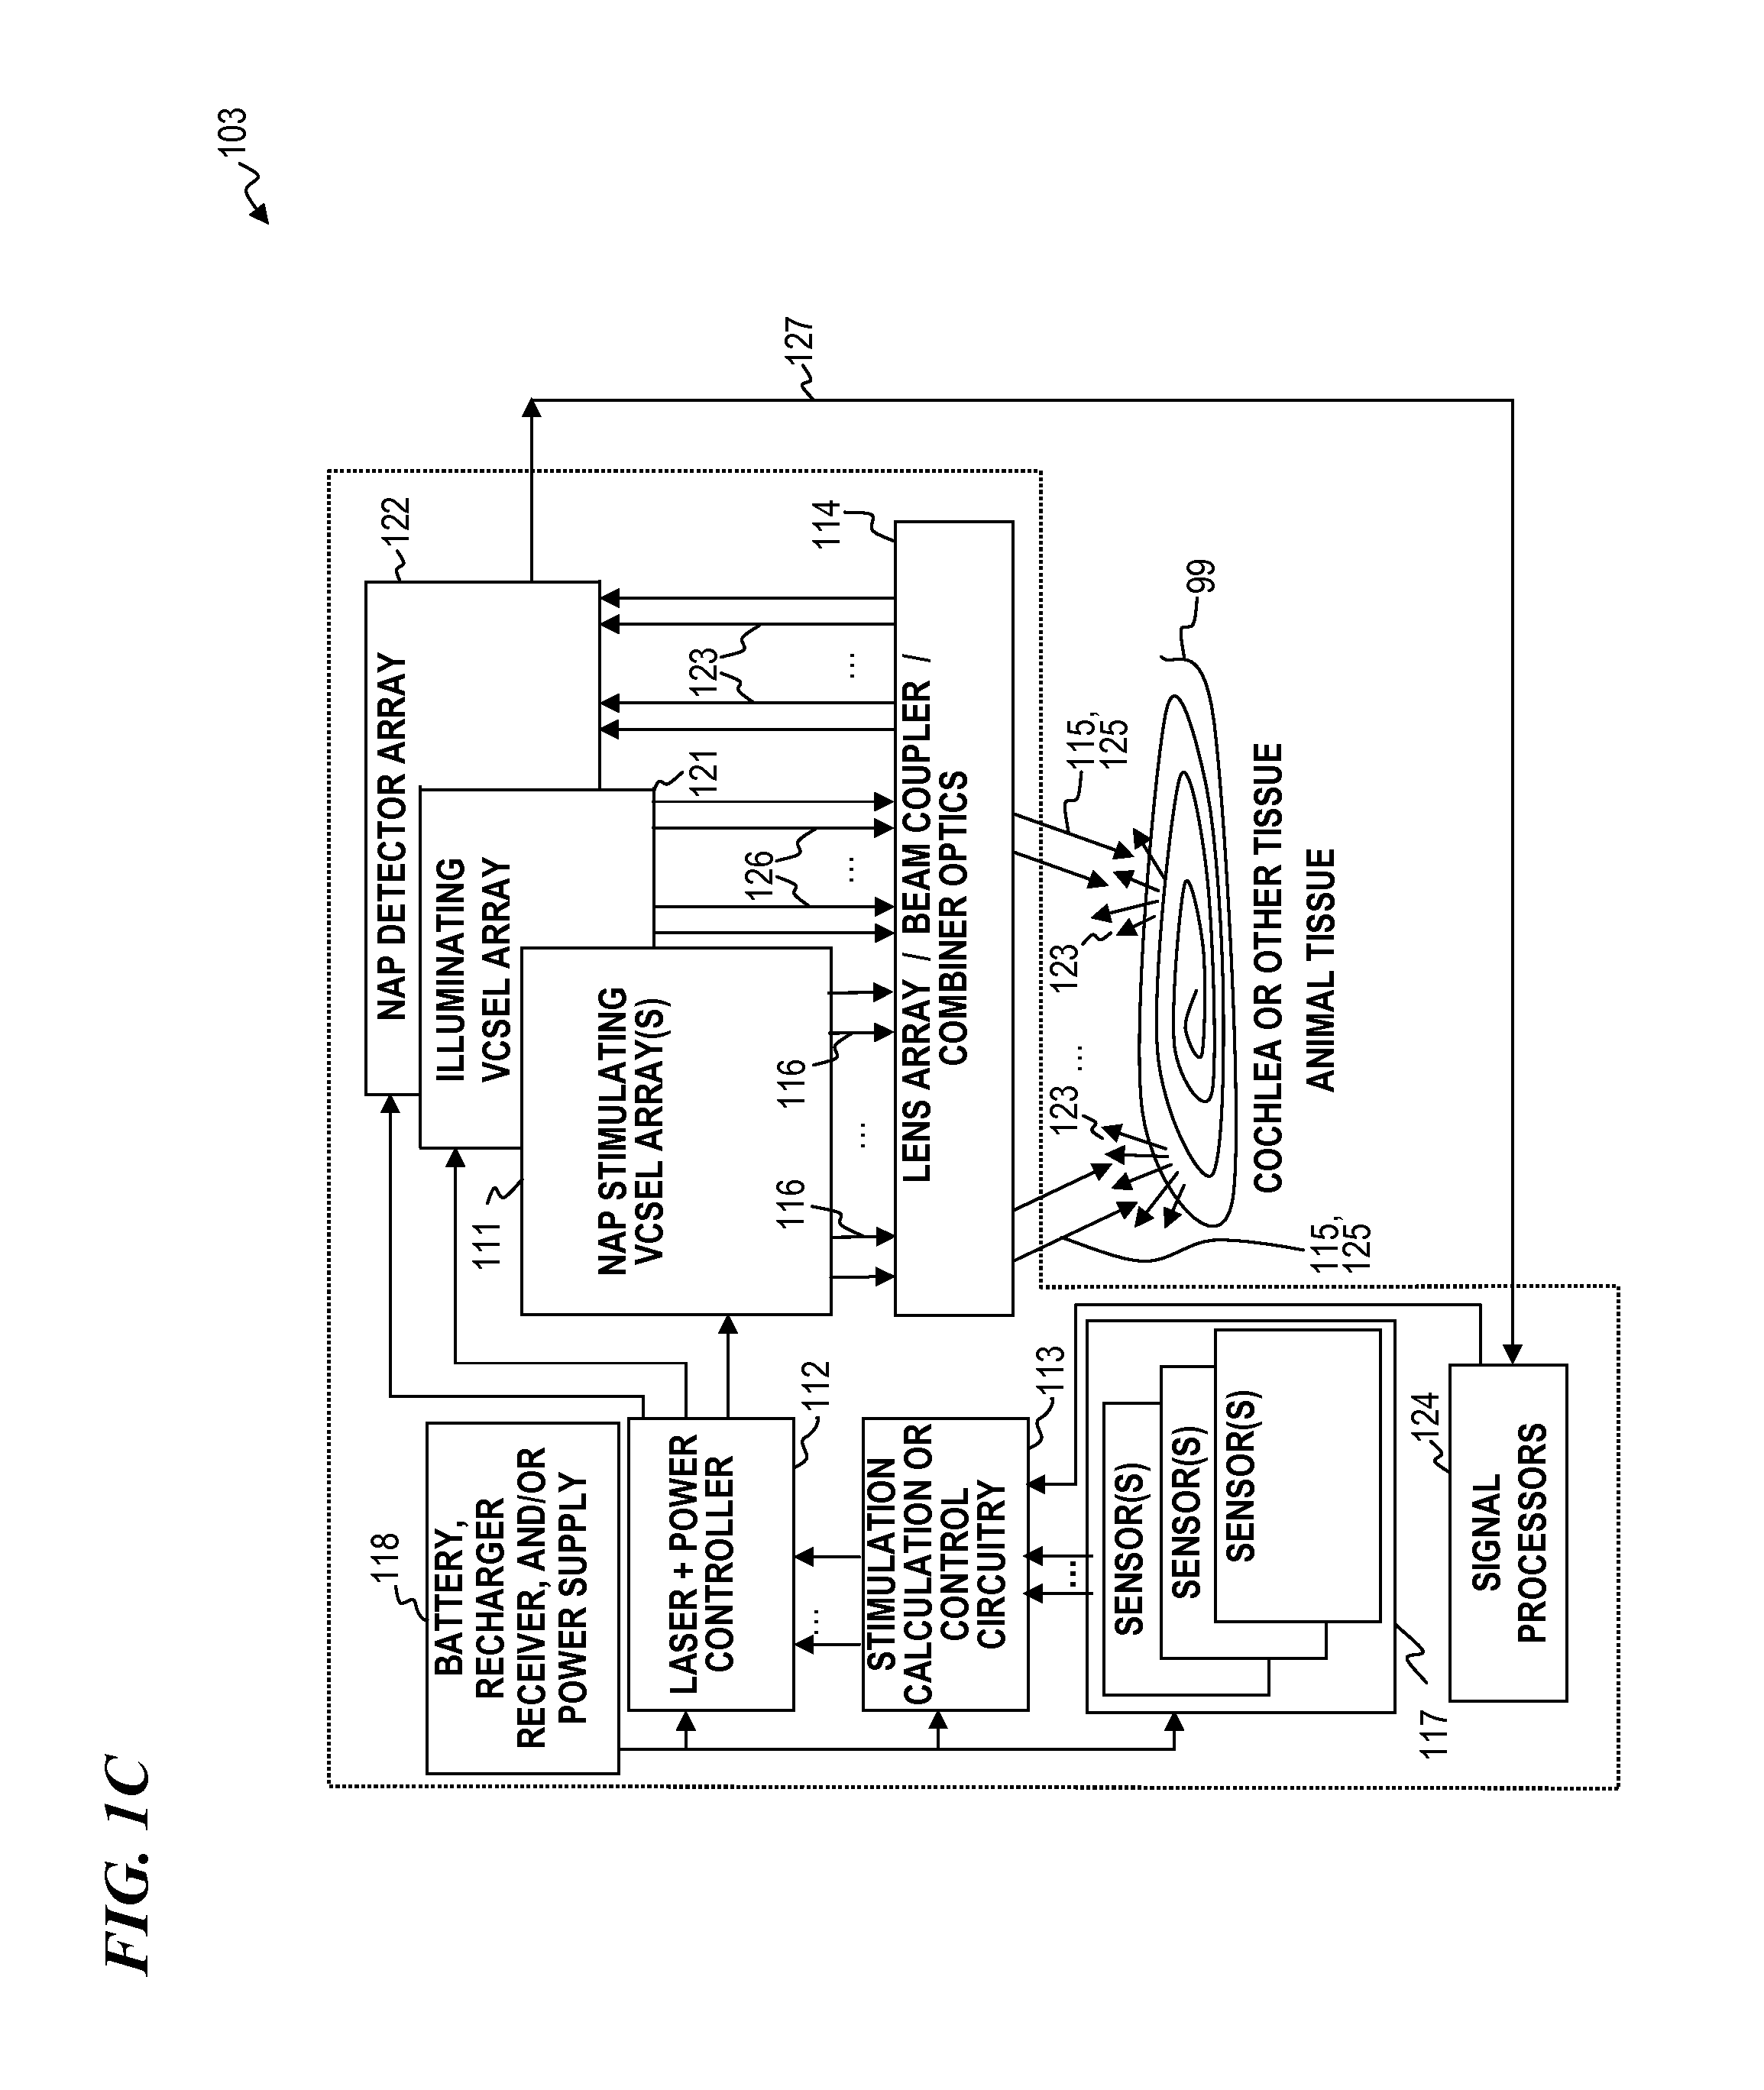 VCSEL array stimulator apparatus and method for light stimulation of bodily tissues